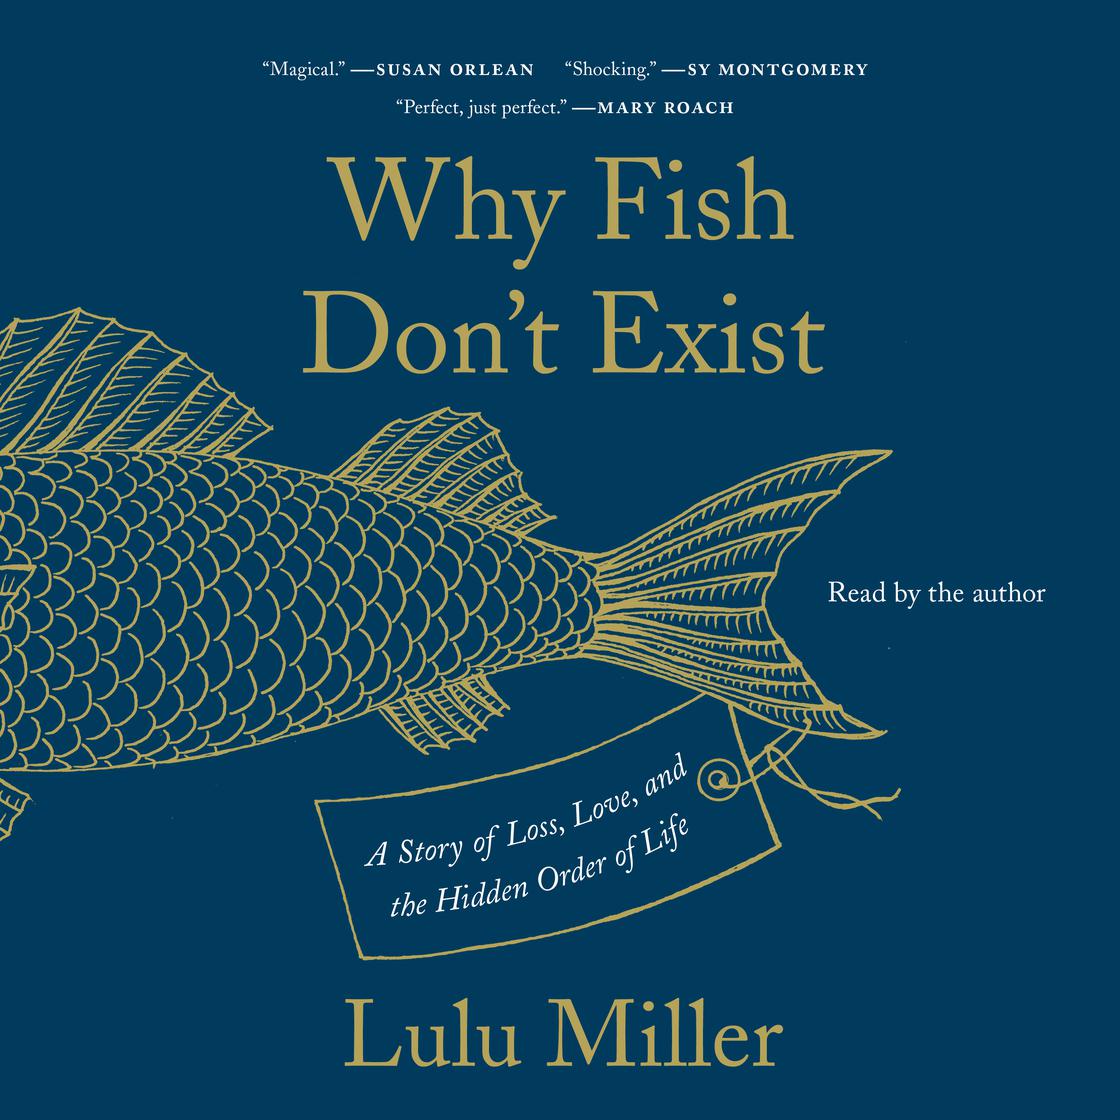 Why Fish Don't Exist (AudiobookFormat, 2020, Simon & Schuster Audio)